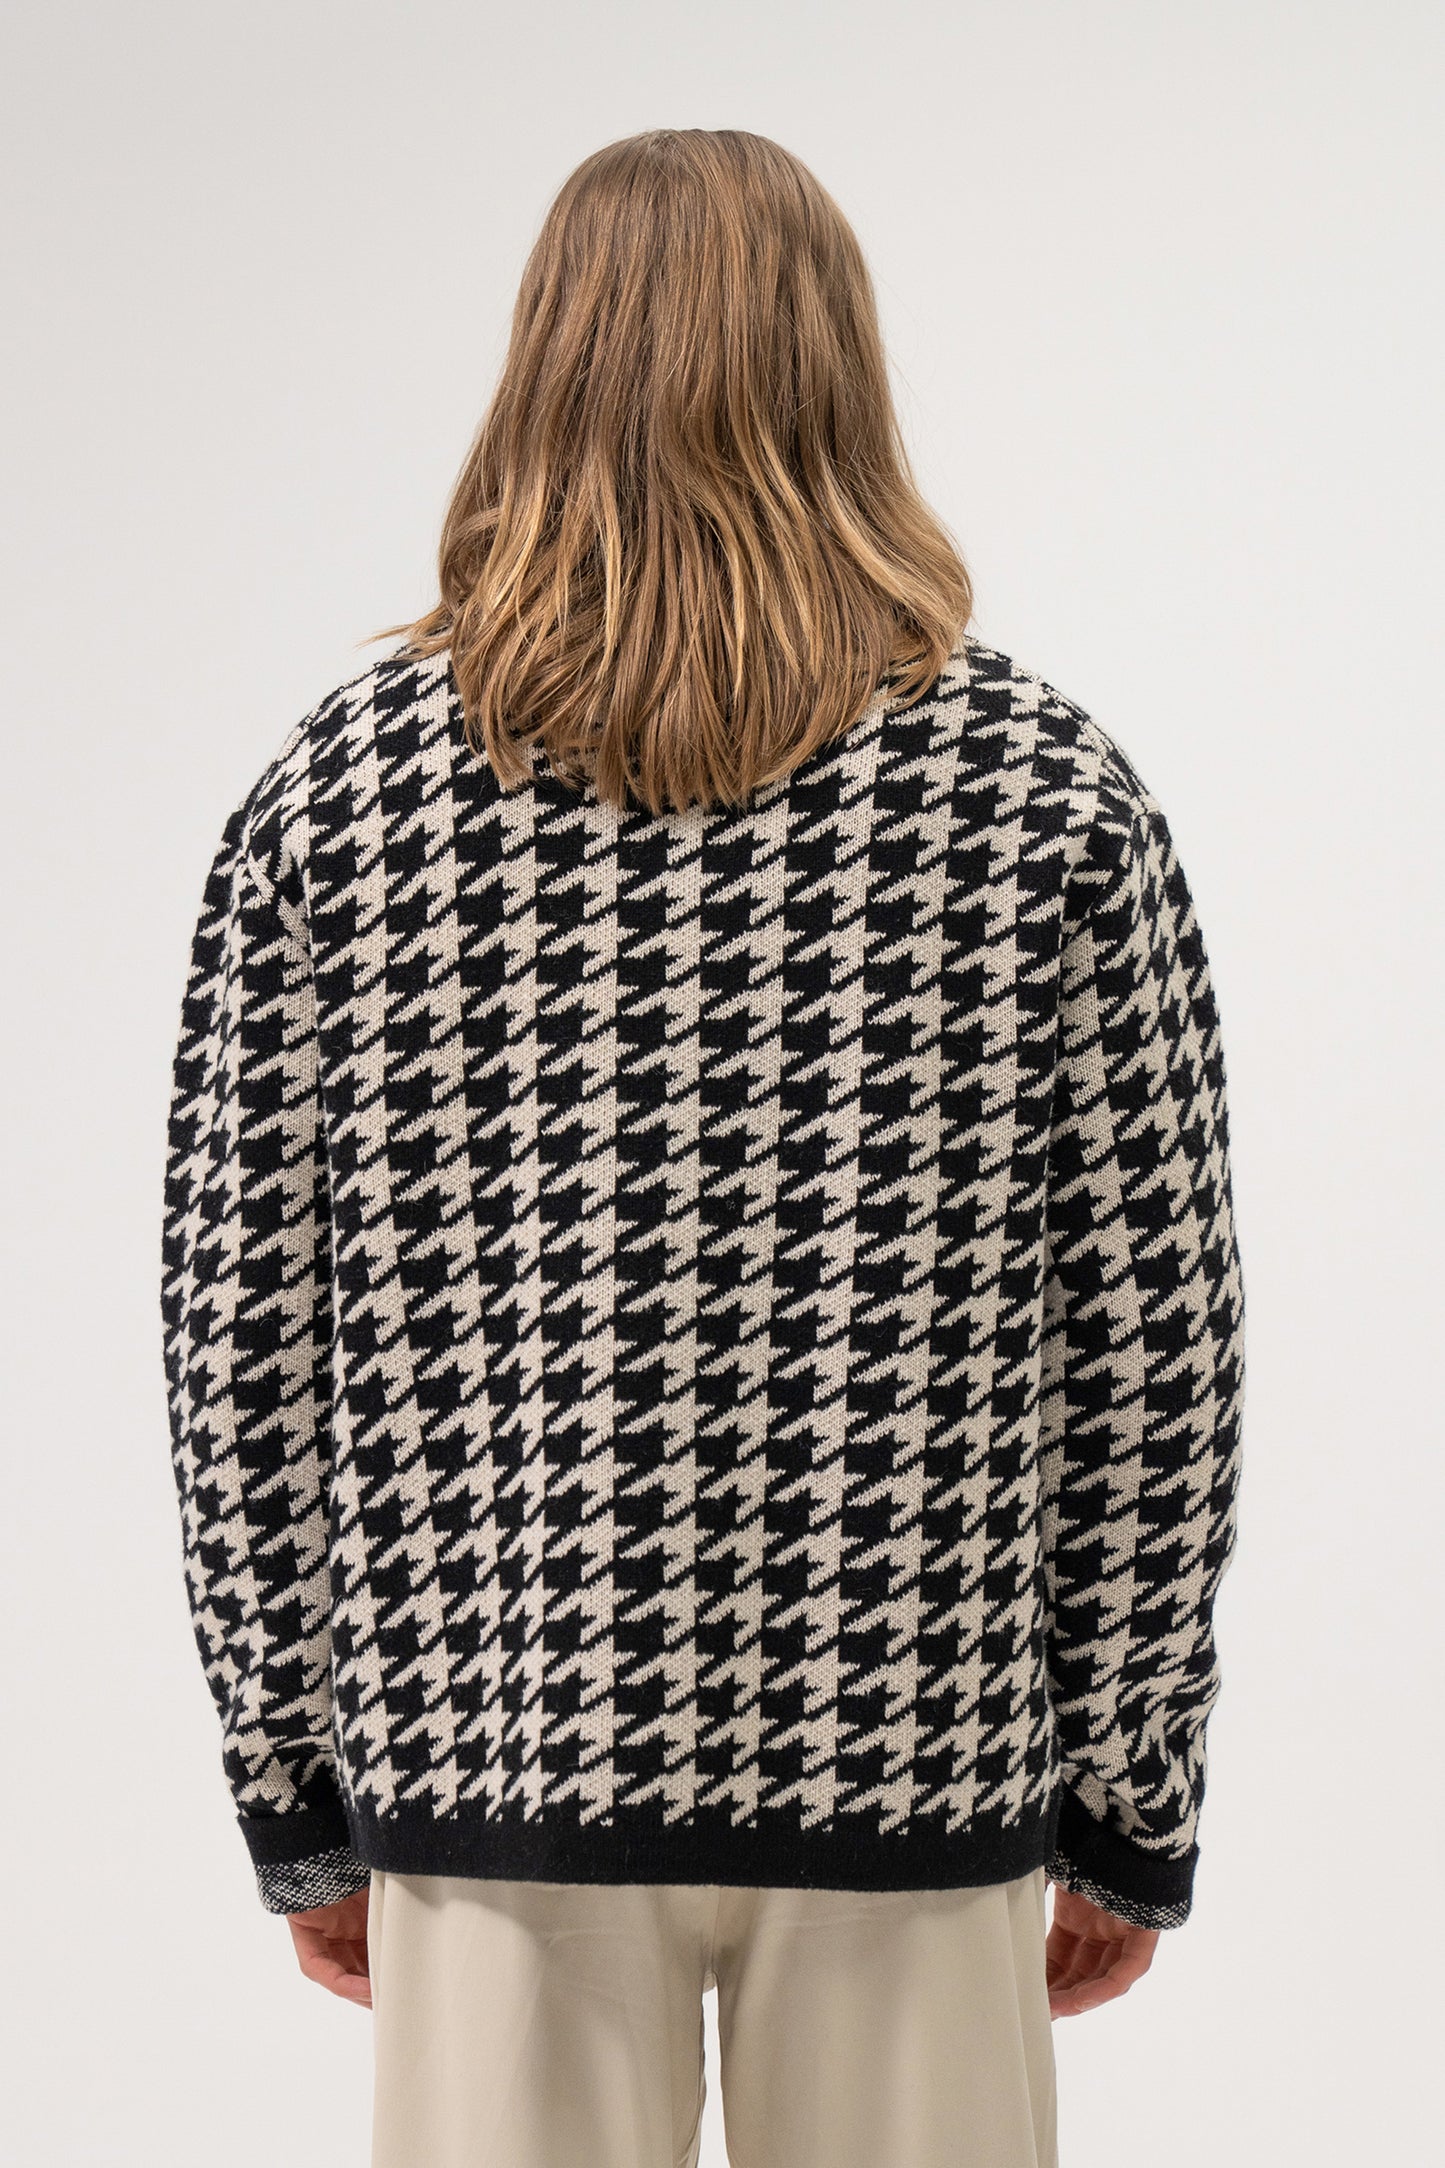 DOGTOOTH WOOL V NECK KNIT SWEATER